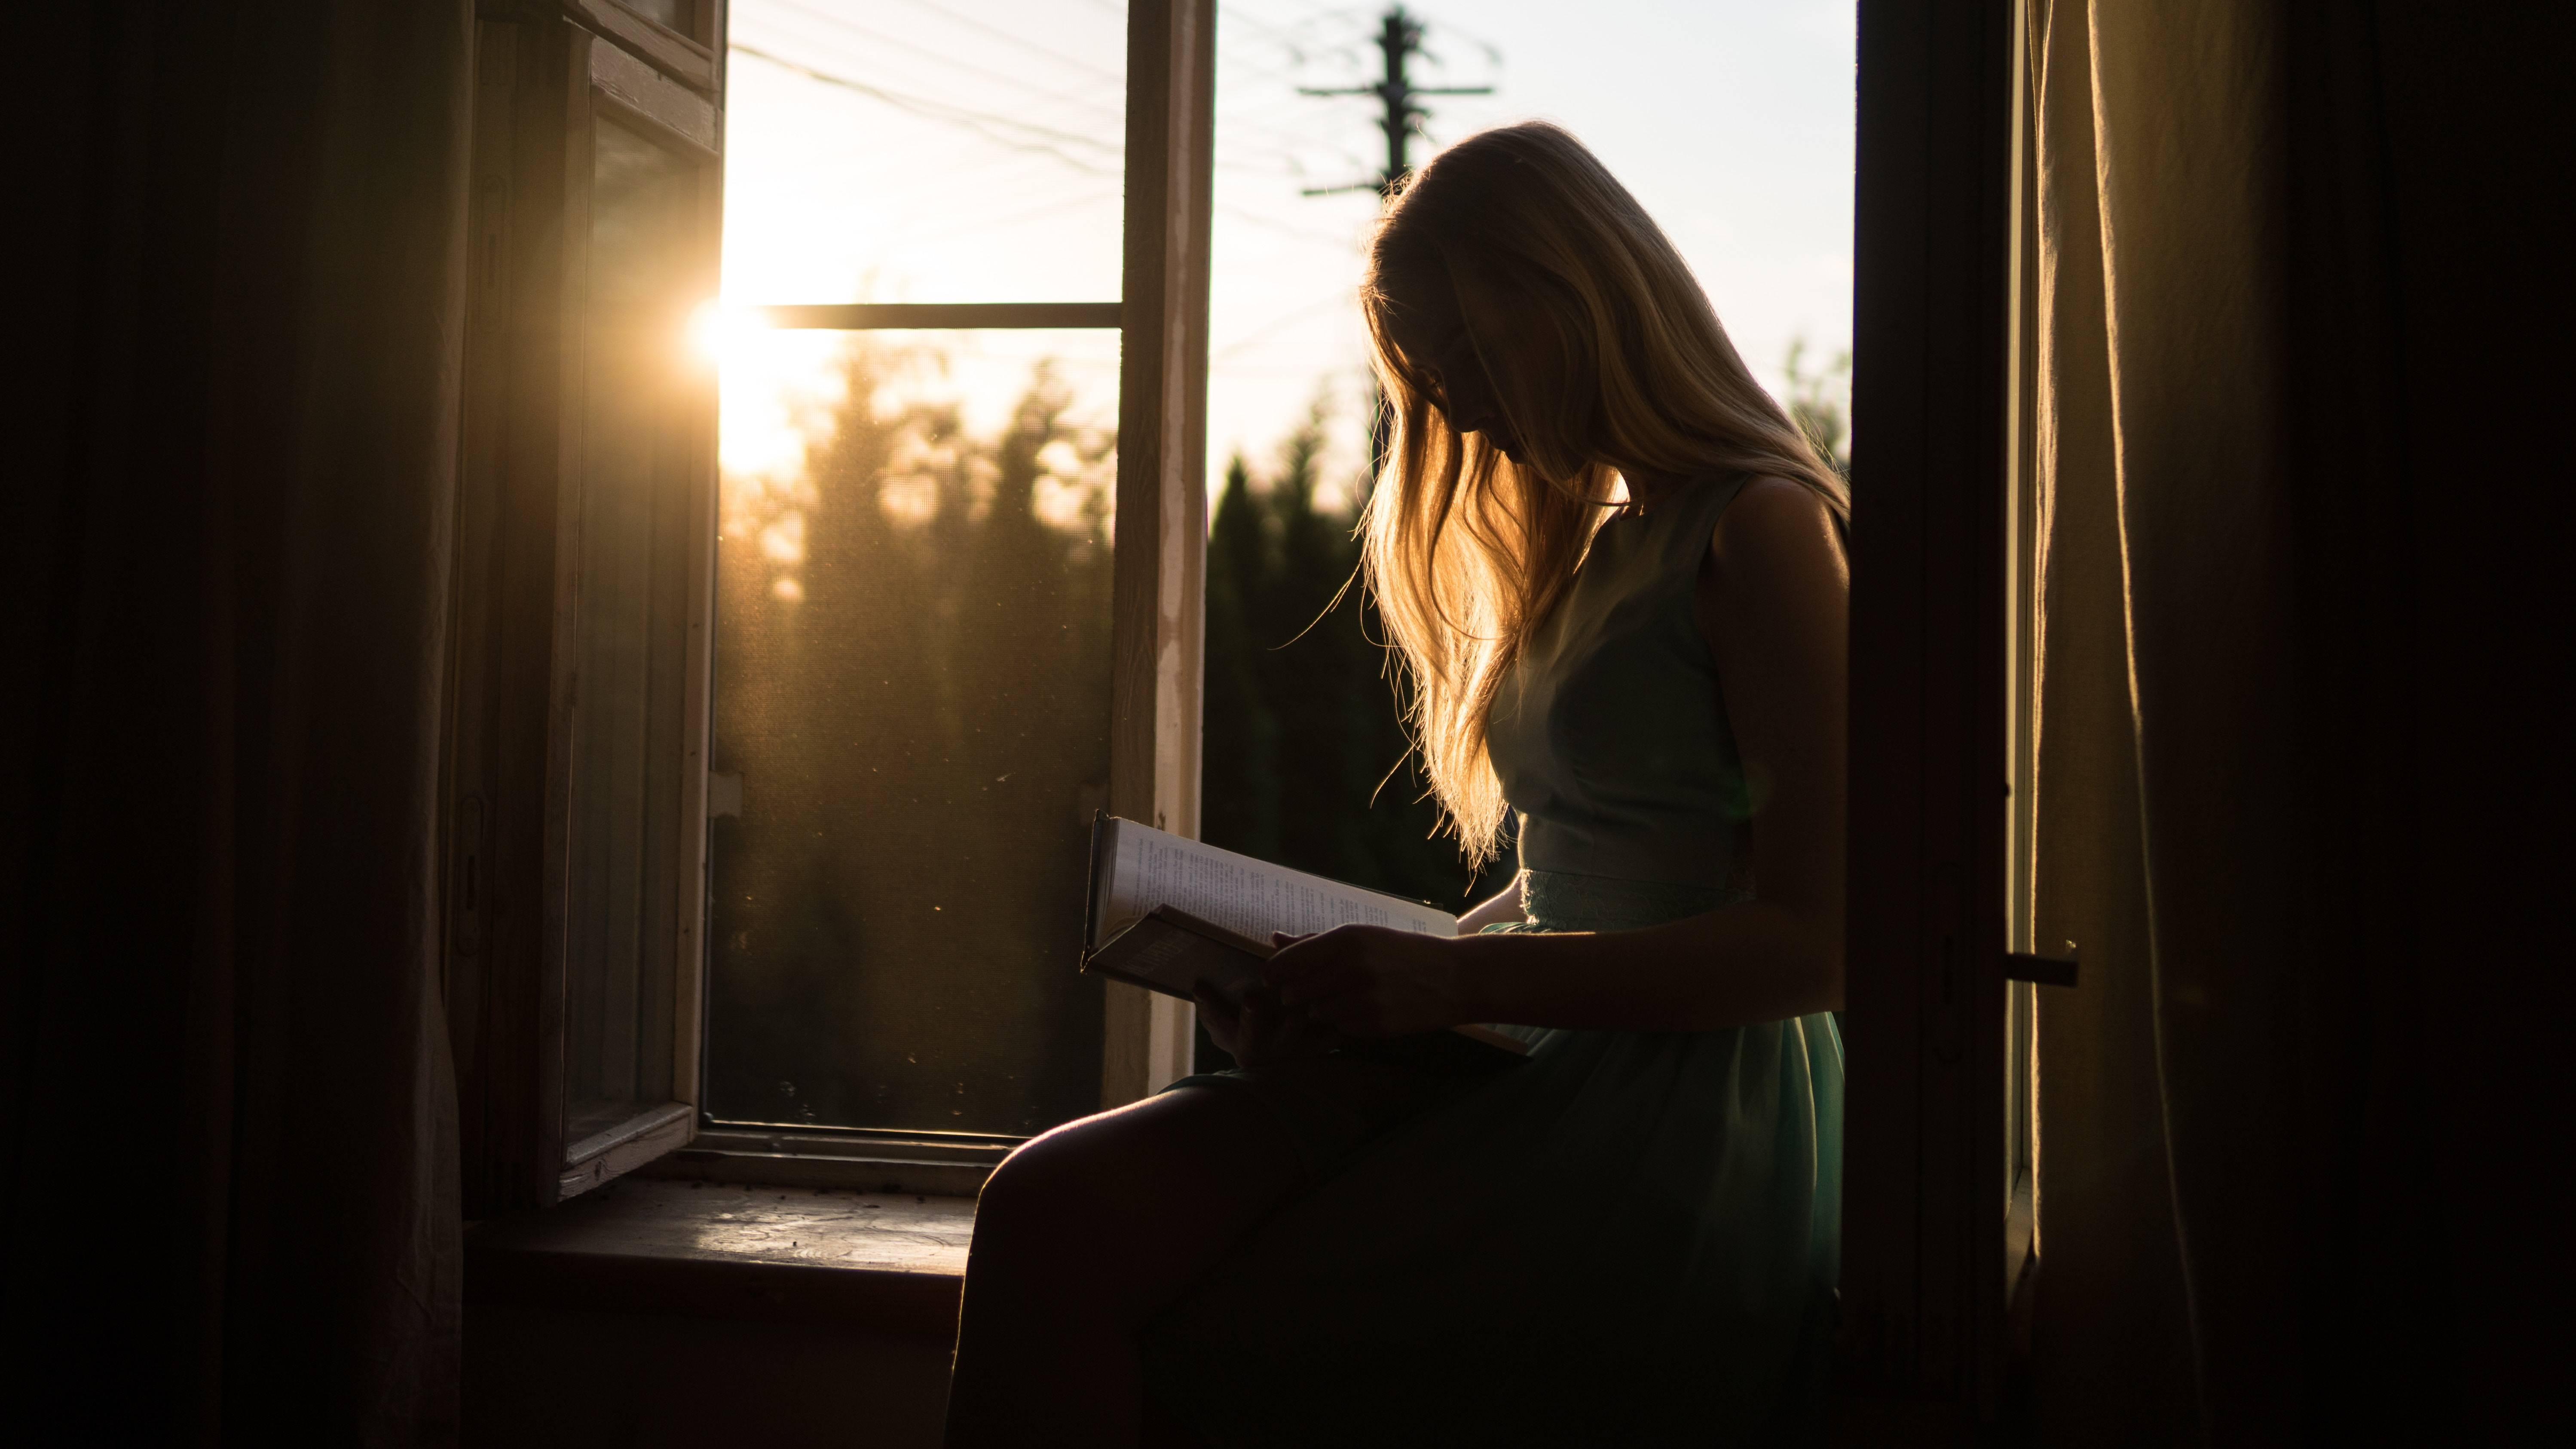 silhouette of a woman reading a book in front of a window